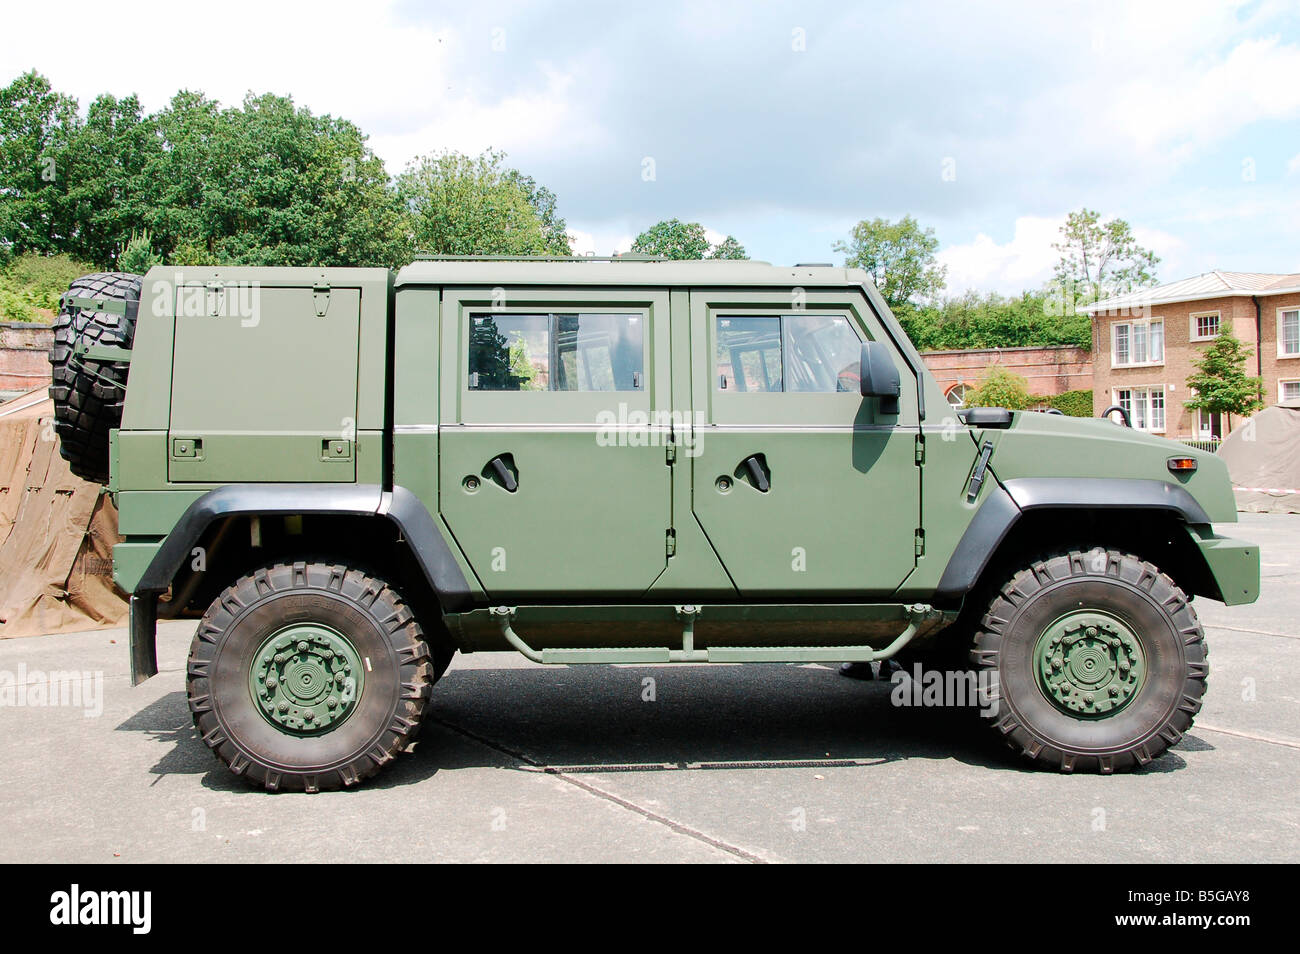 The Iveco Light Mulirole Vehicle that replaces the VW Iltis jeeps in the Belgian Army Stock Photo